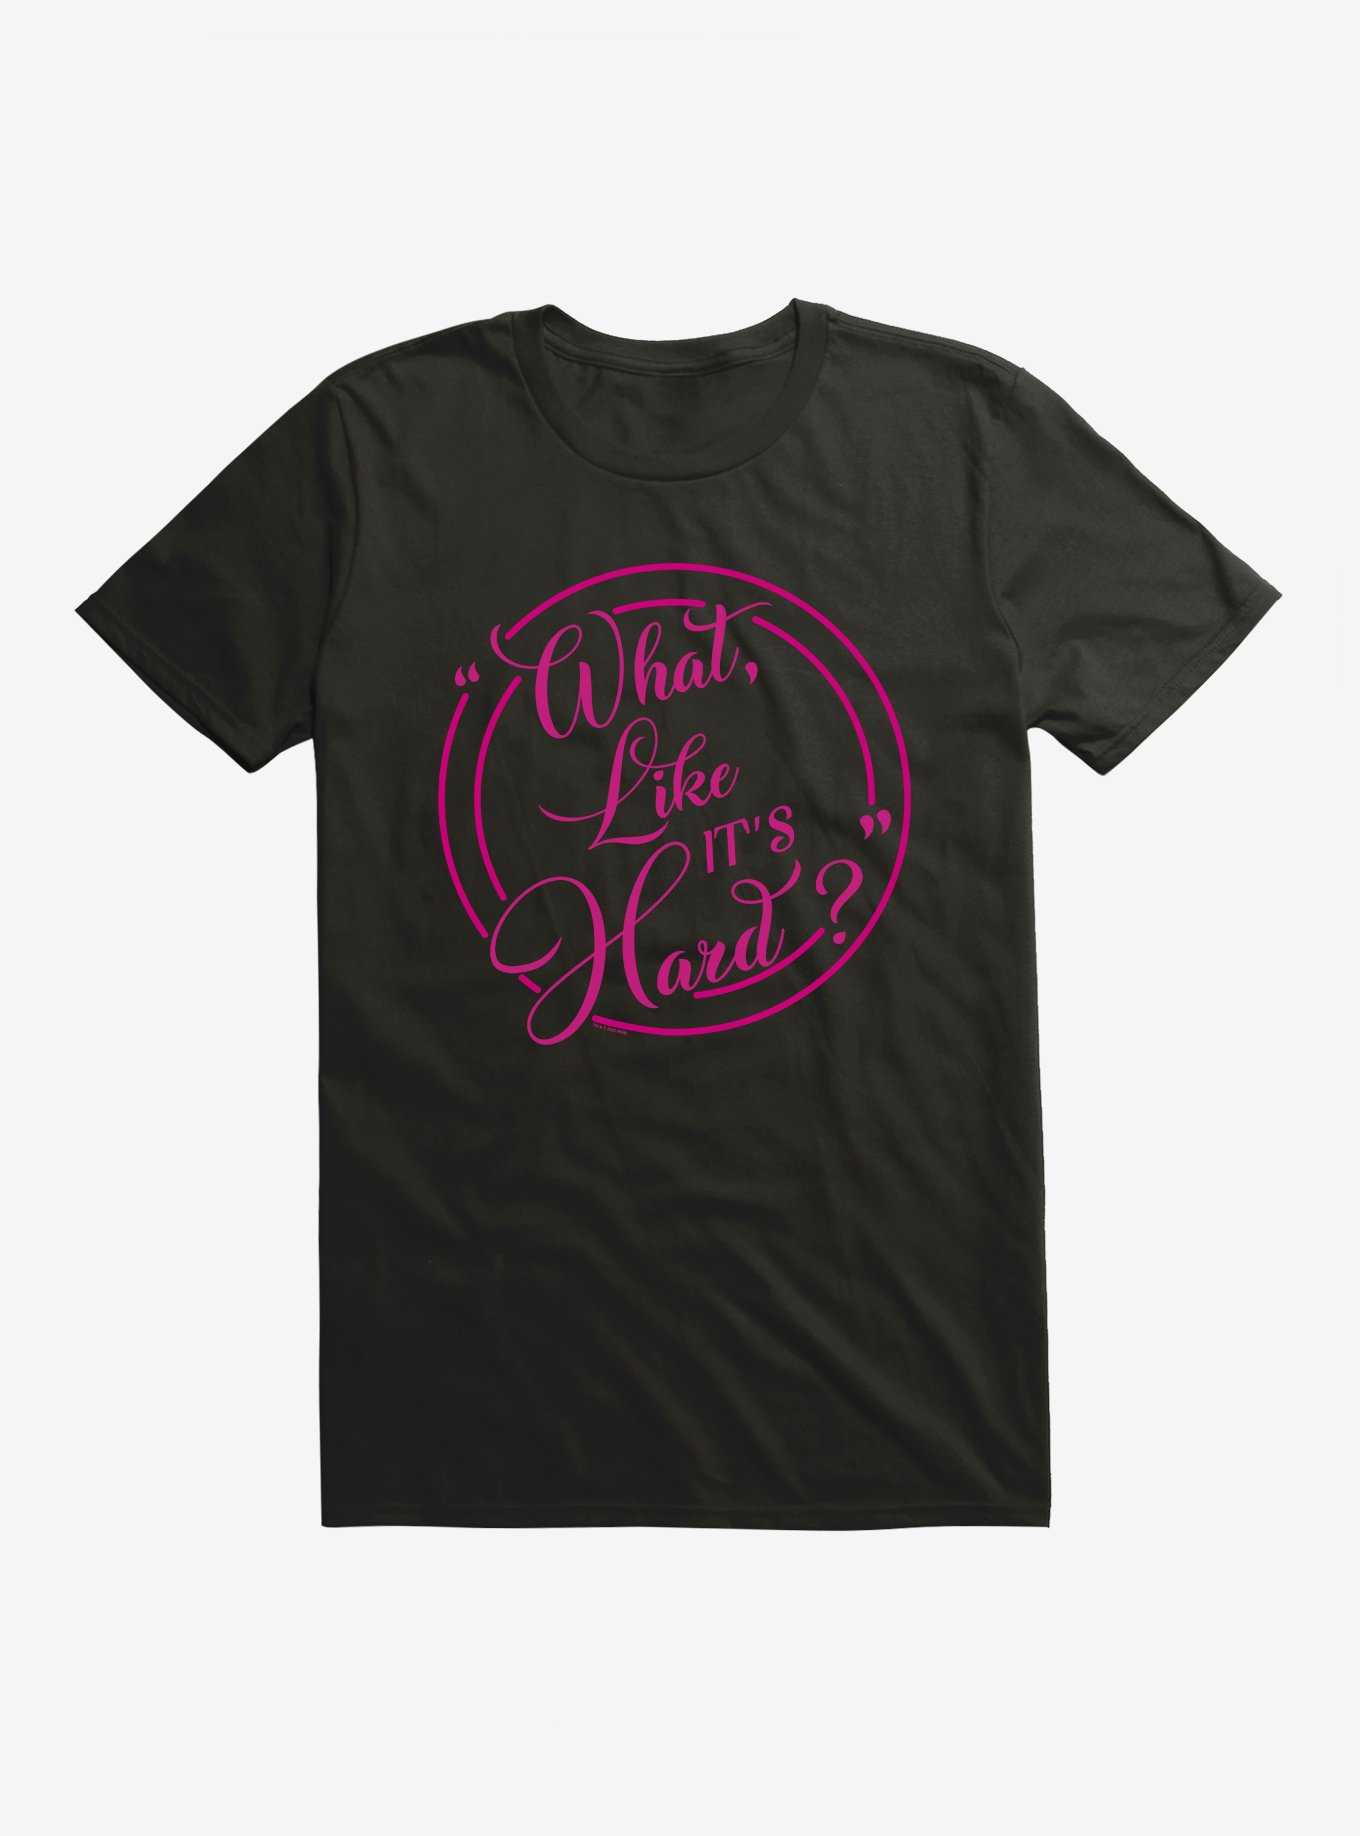 Legally Blonde Like it's Hard? T-Shirt, , hi-res